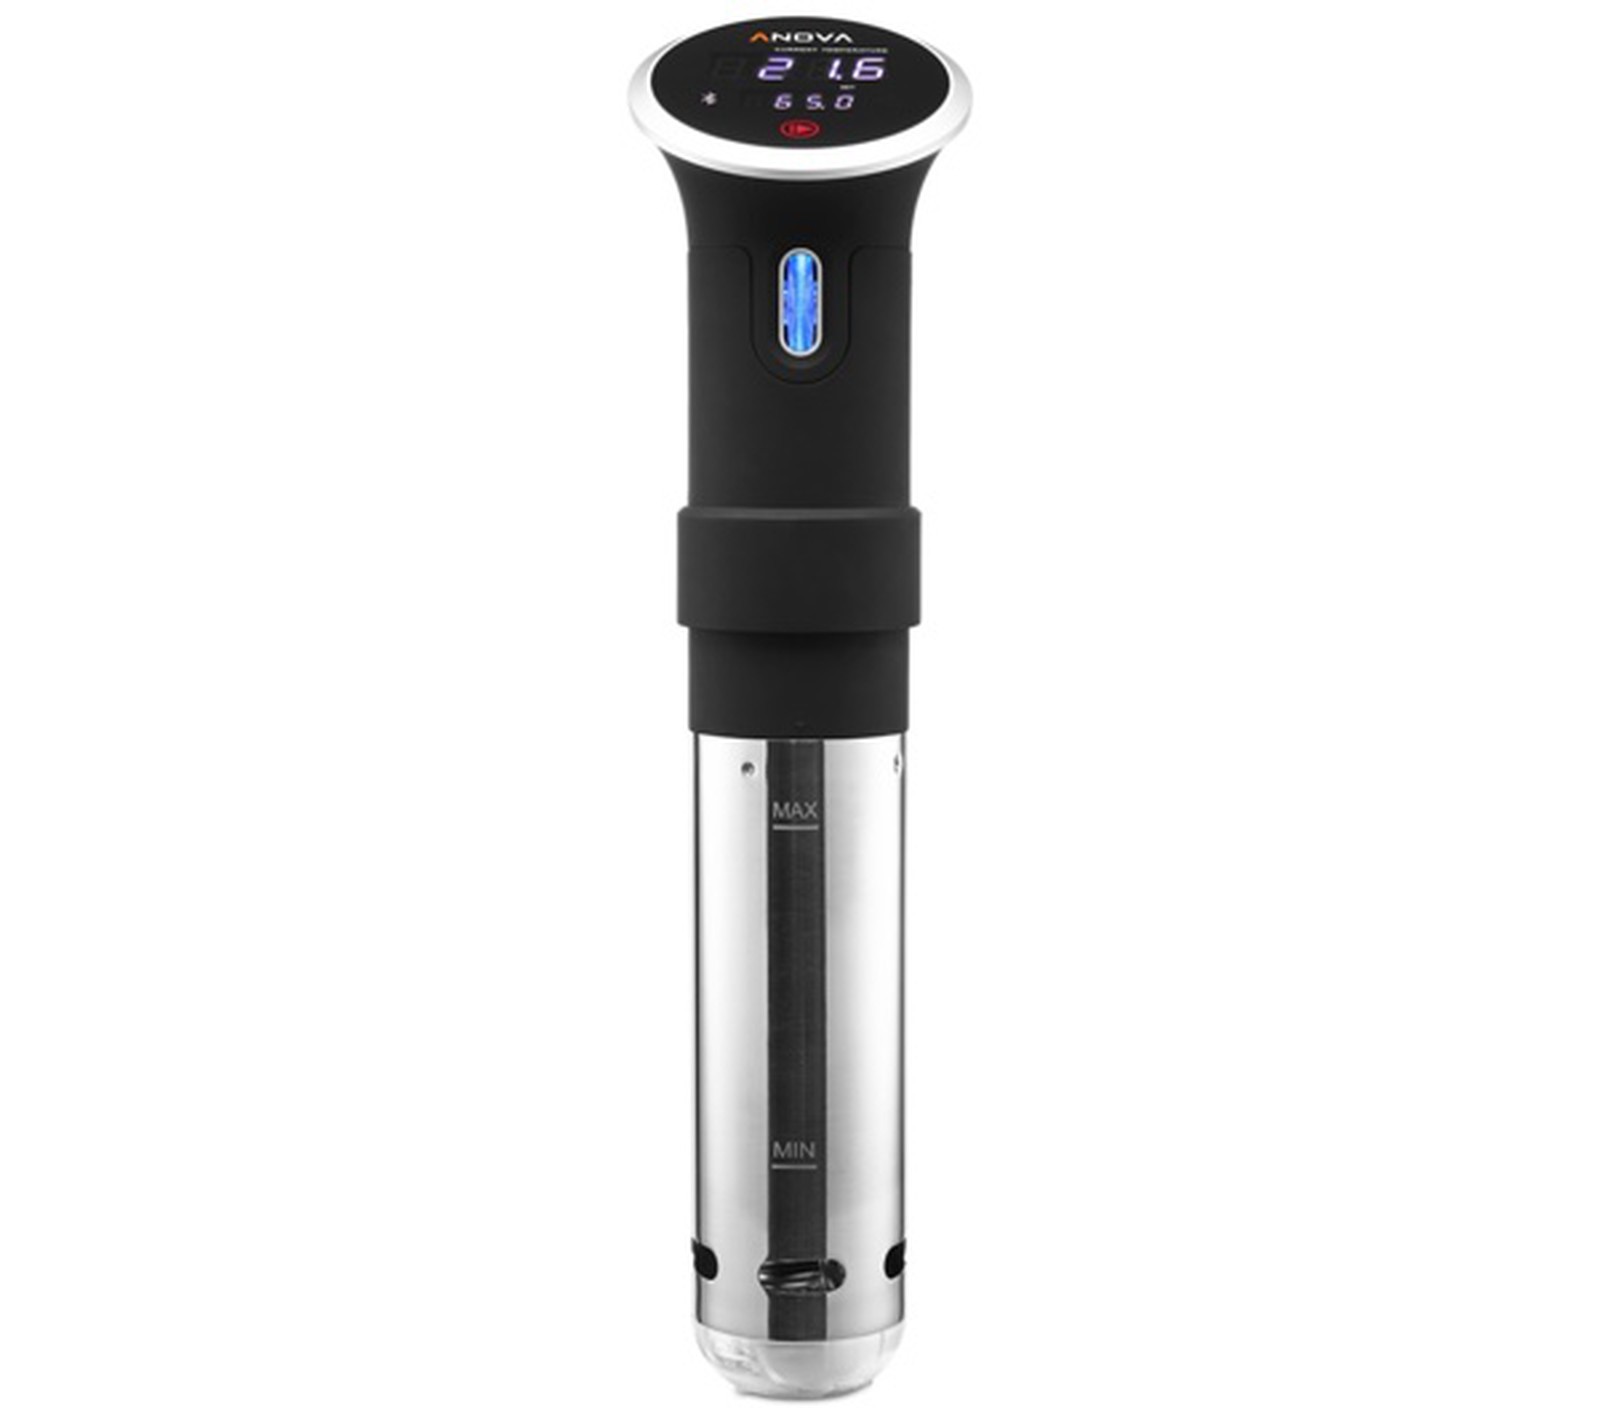 Anova Wi-Fi Precision Sous Vide Cooker Becomes First Cooking Device